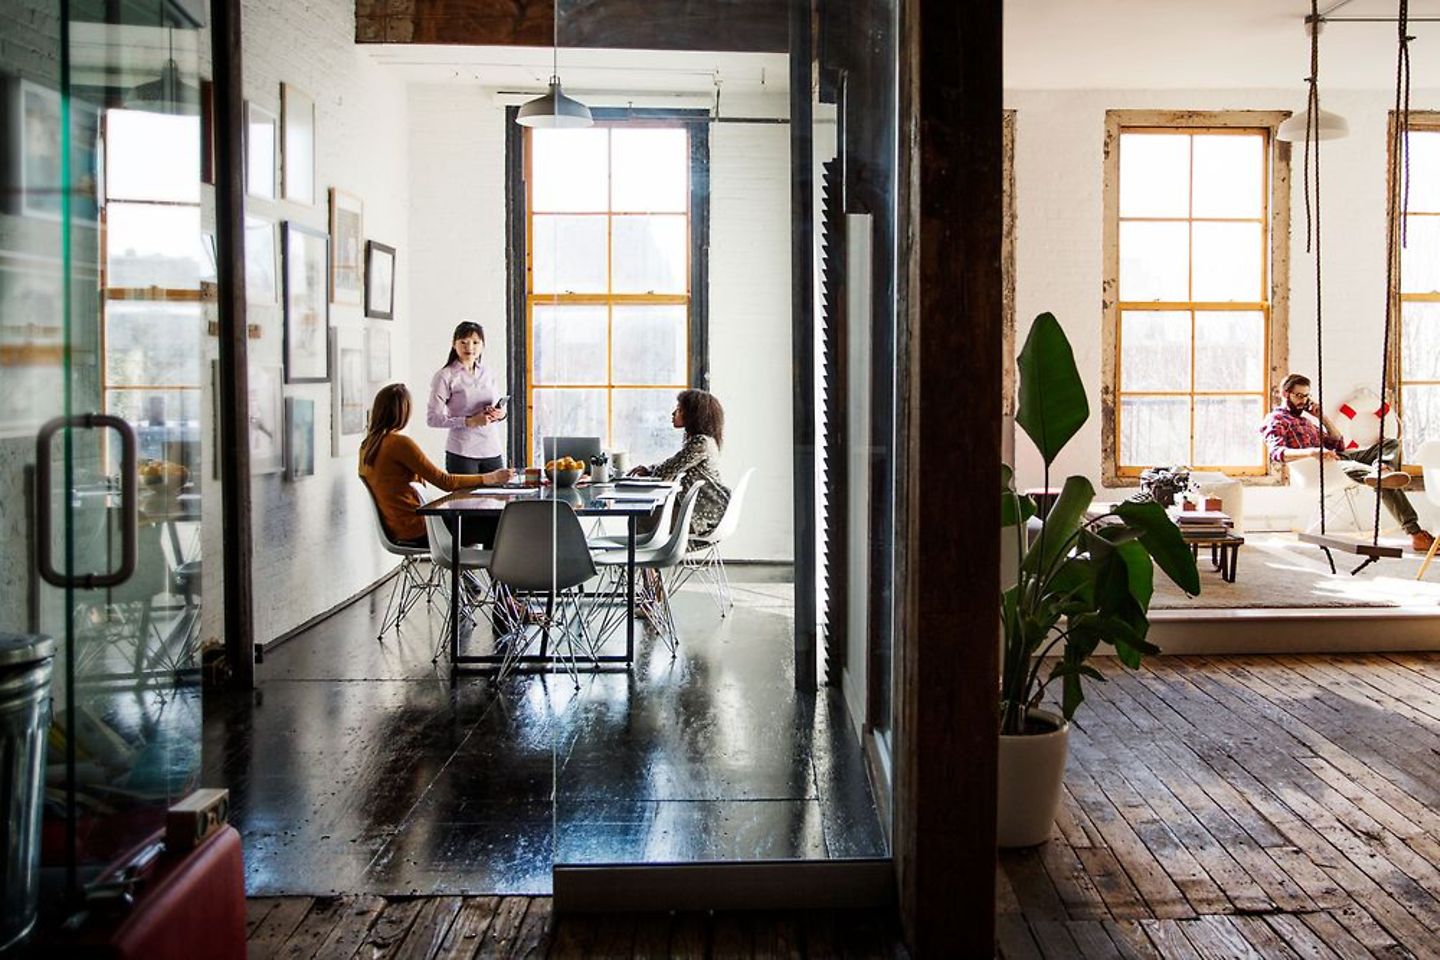 Fancy office in warm tones with wooden floors and some office people in it